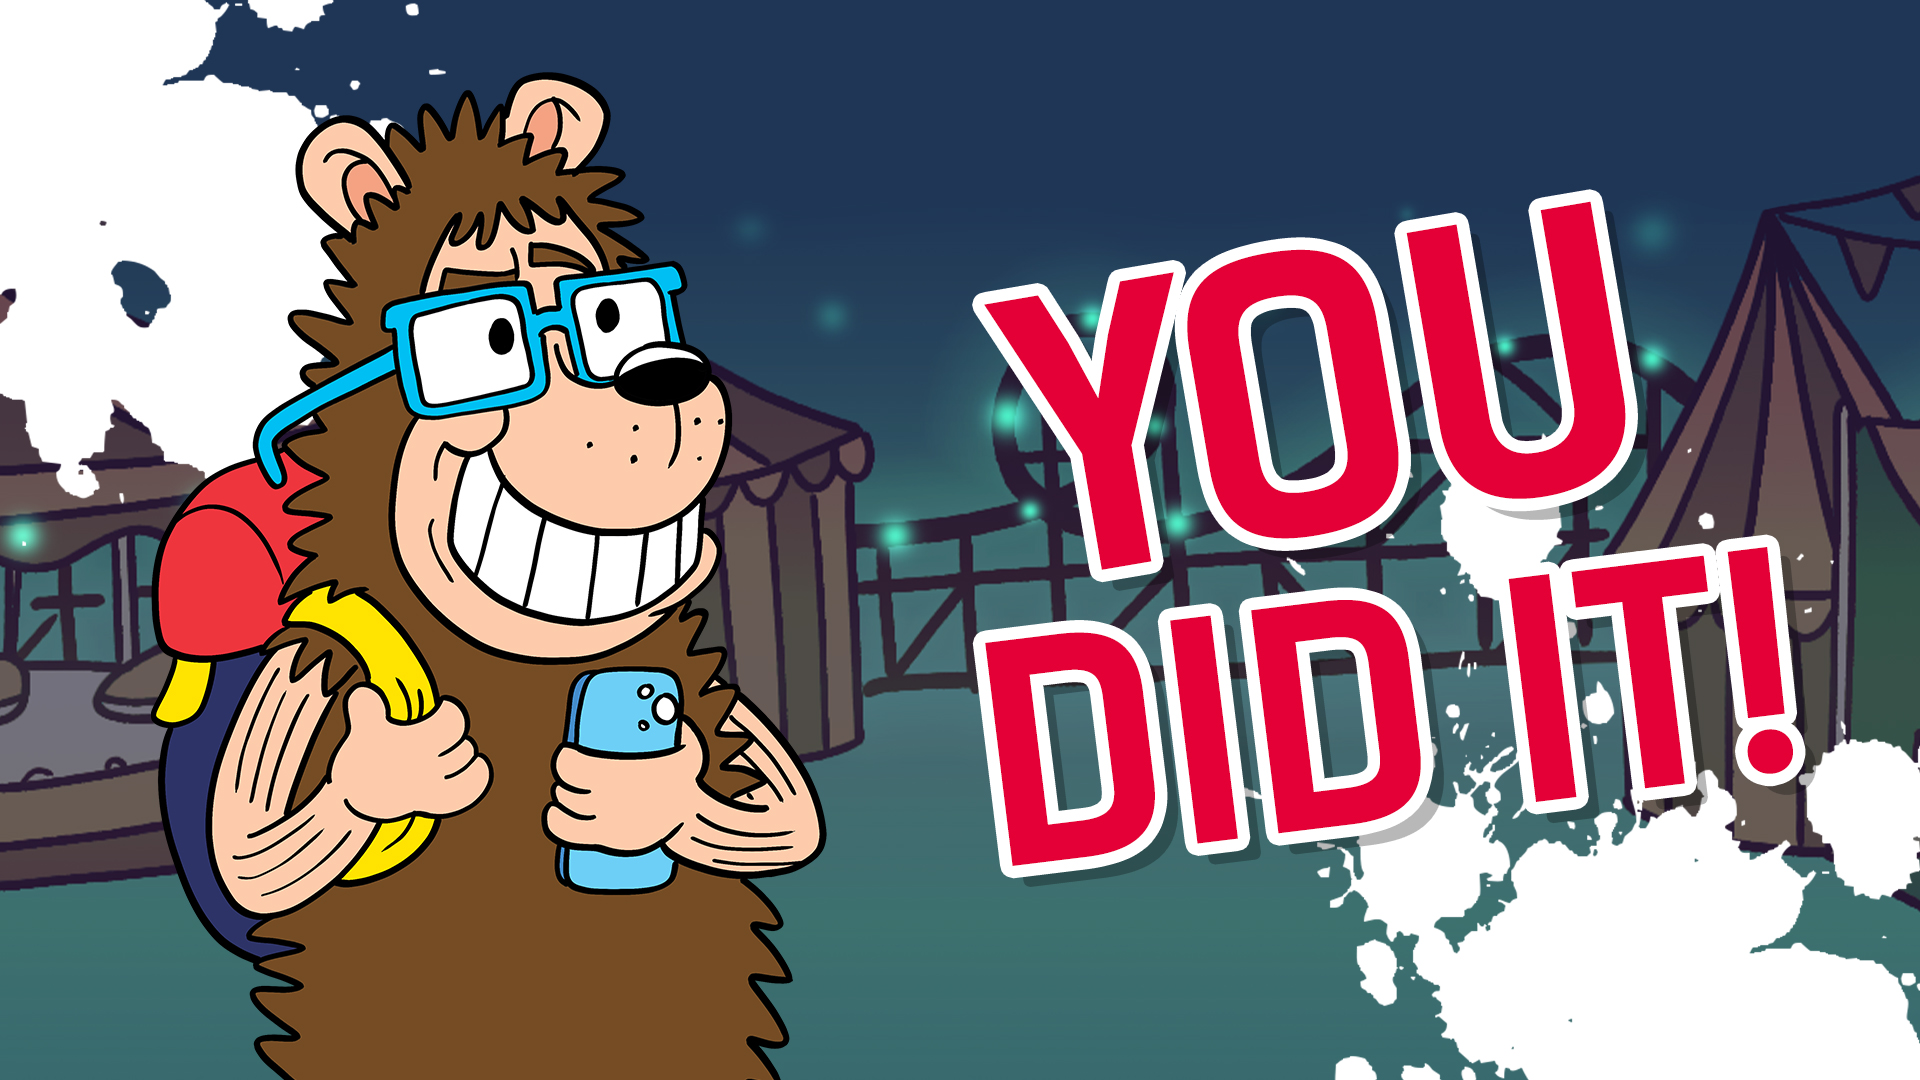 Result: You did it